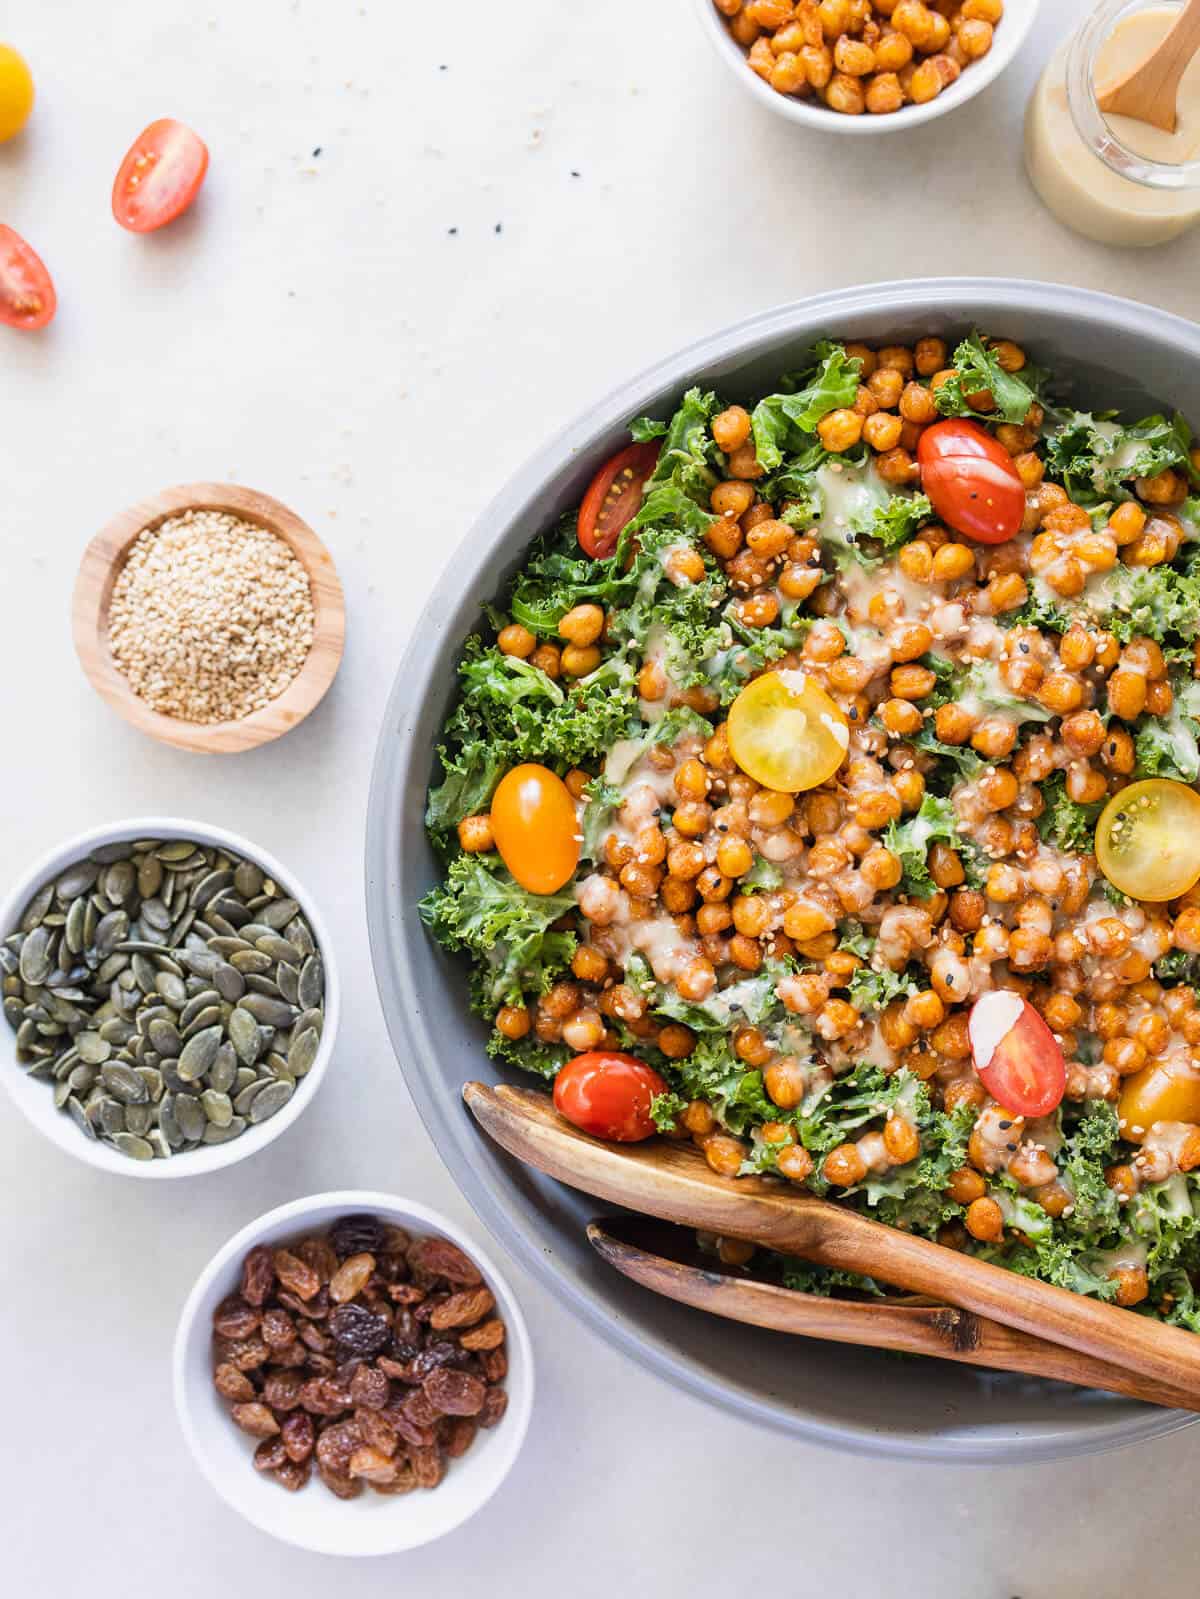 crispy chickpea kale salad with tahini dressing optional add ins in small bowls.